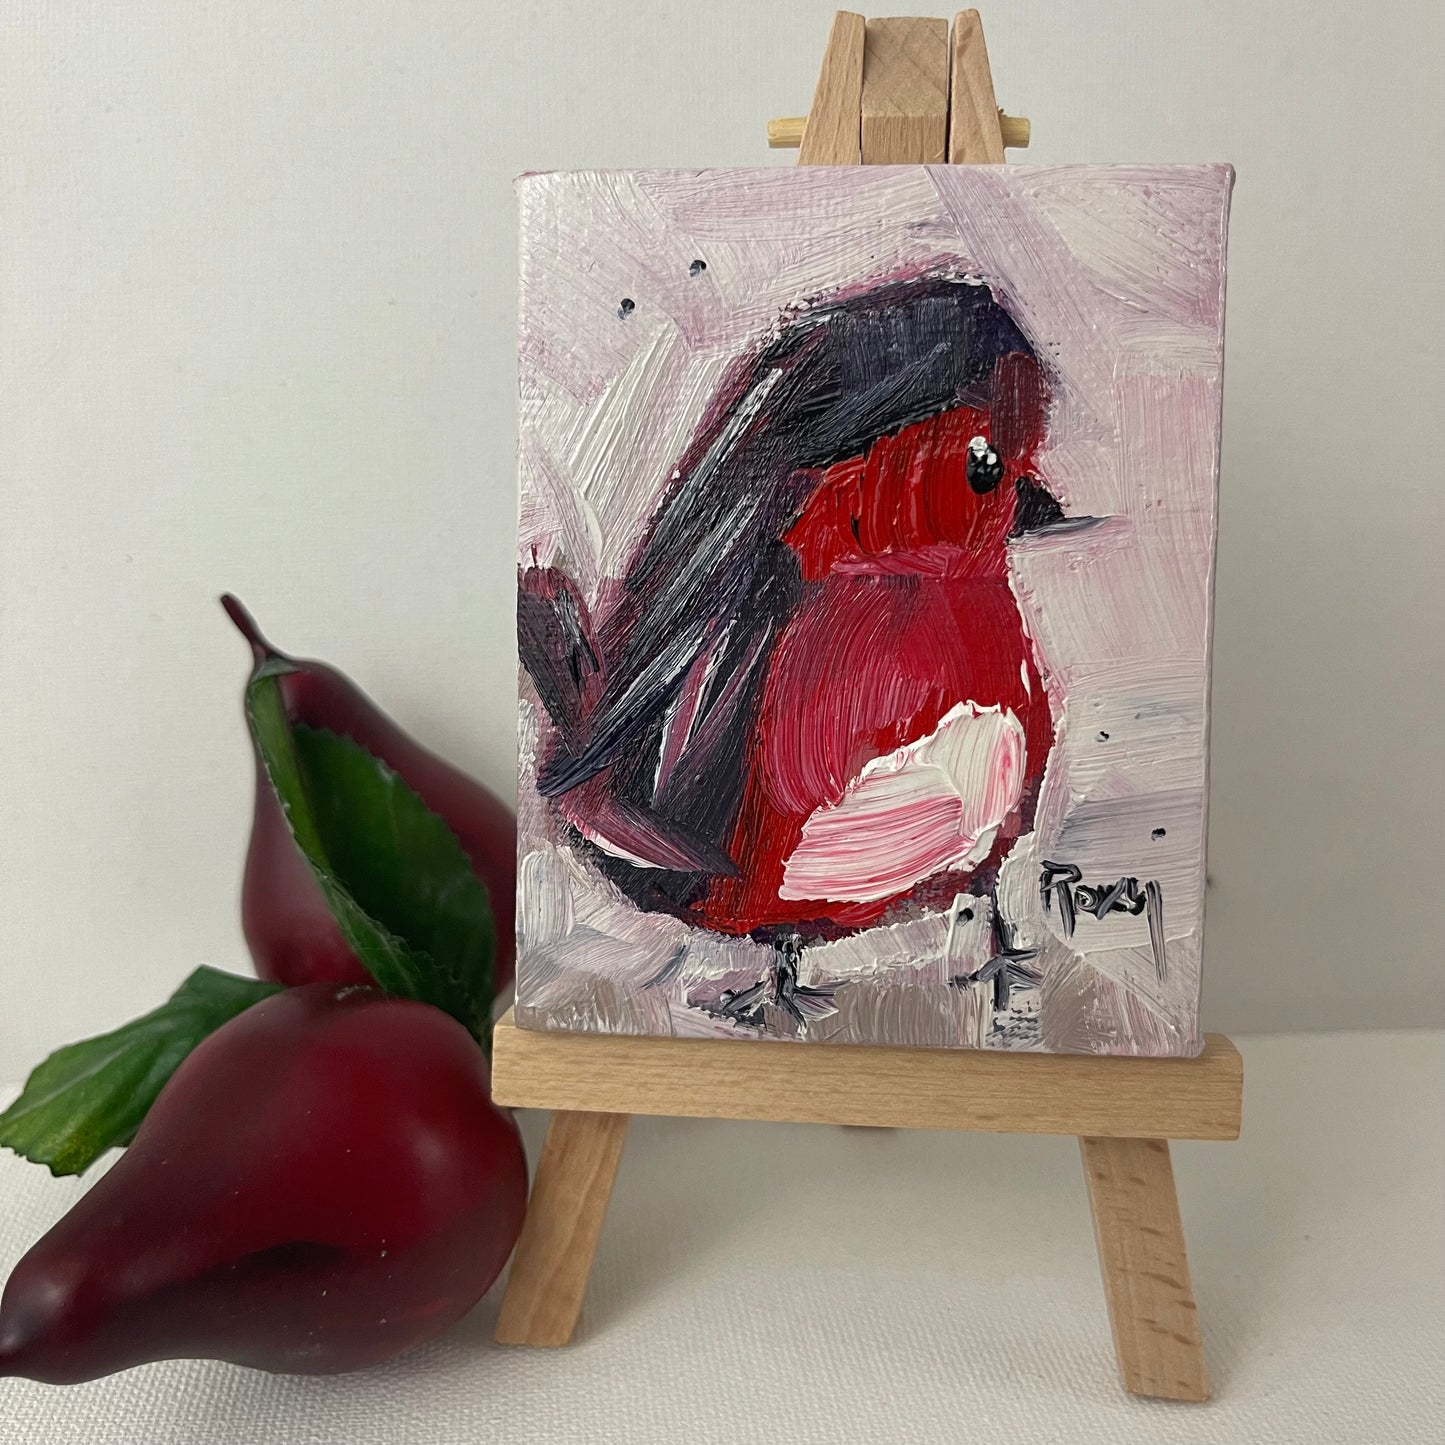 Adorable Red Robin Chick-Original Miniature Oil Painting with Stand